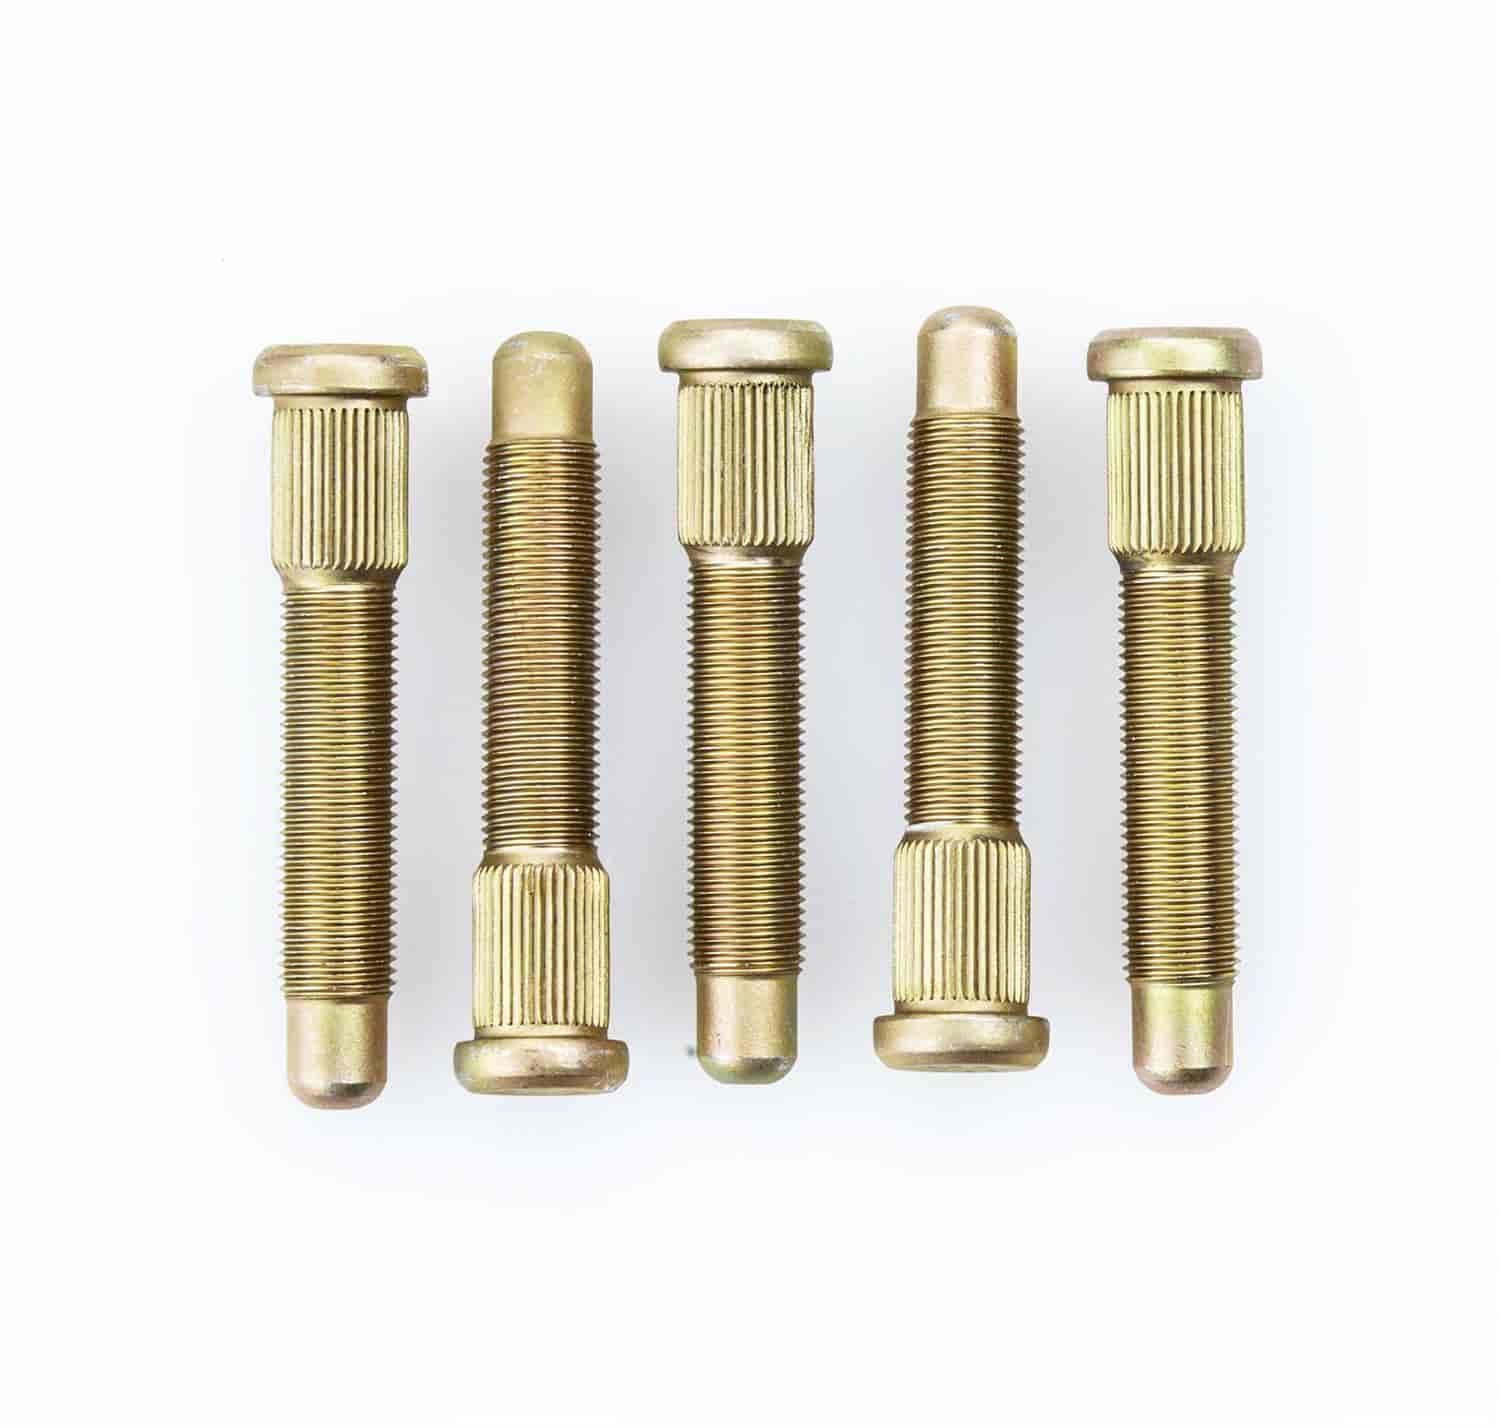 .568" Knurl Wheel Studs Most Frankland-style hubs